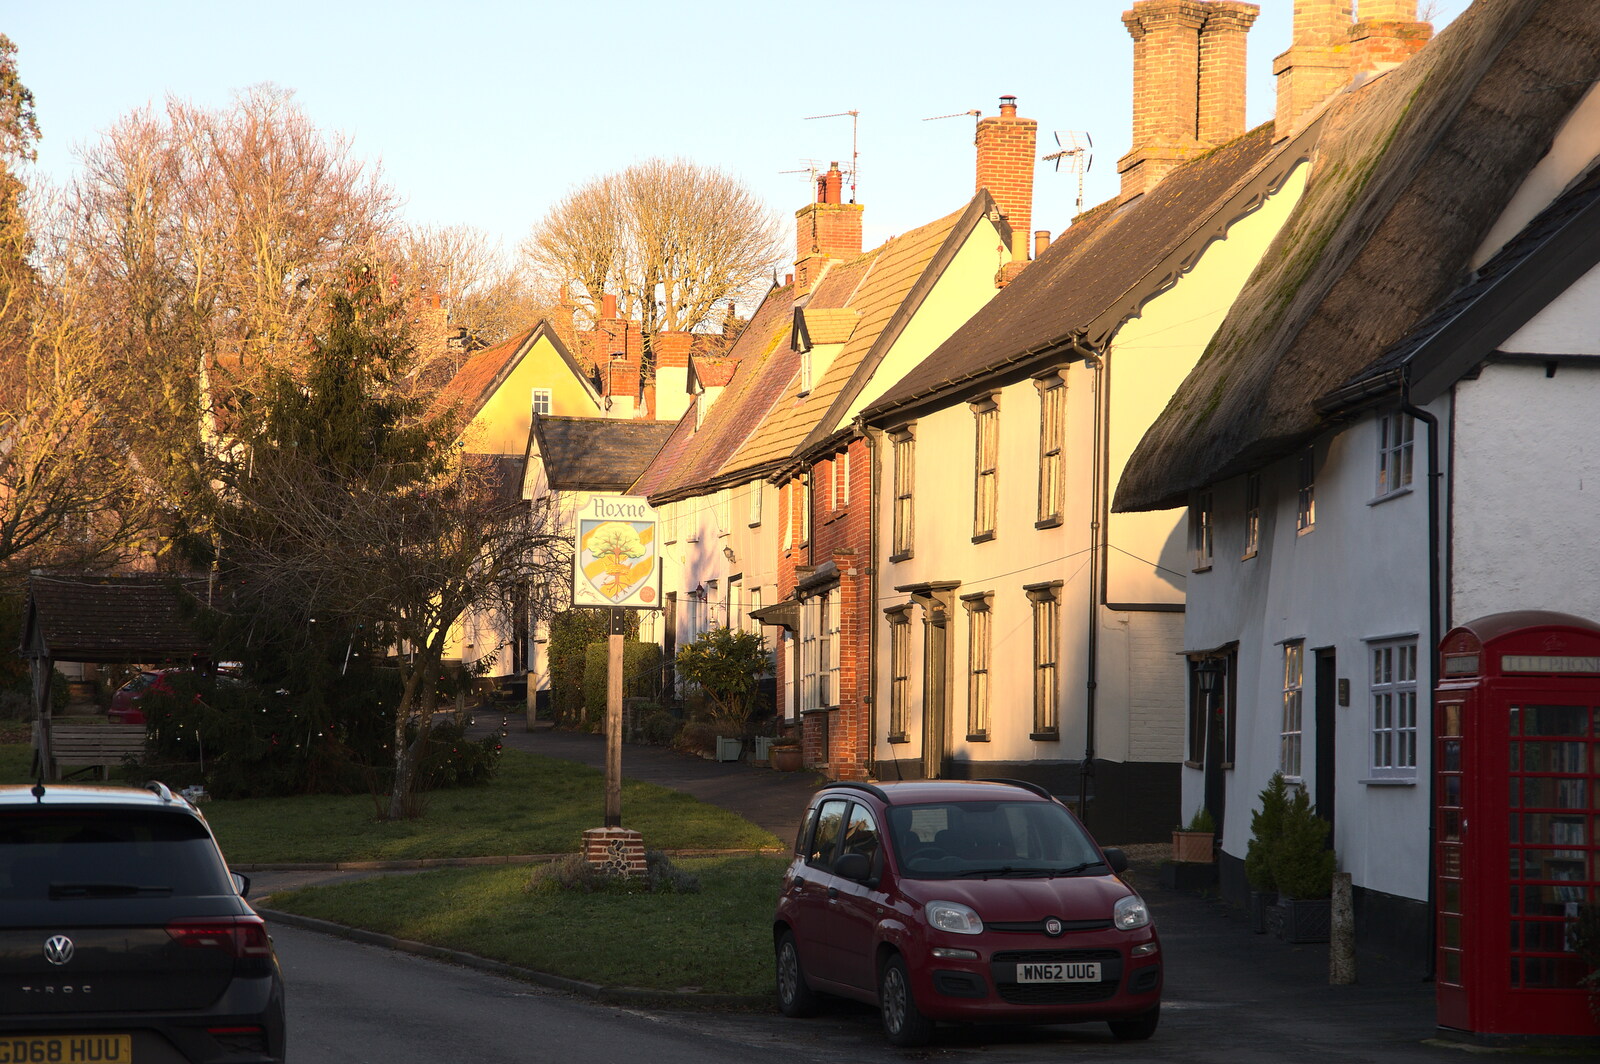 Winter Walks around Brome and Hoxne, Suffolk - 2nd January 2023: Hoxne houses in the low winter sun